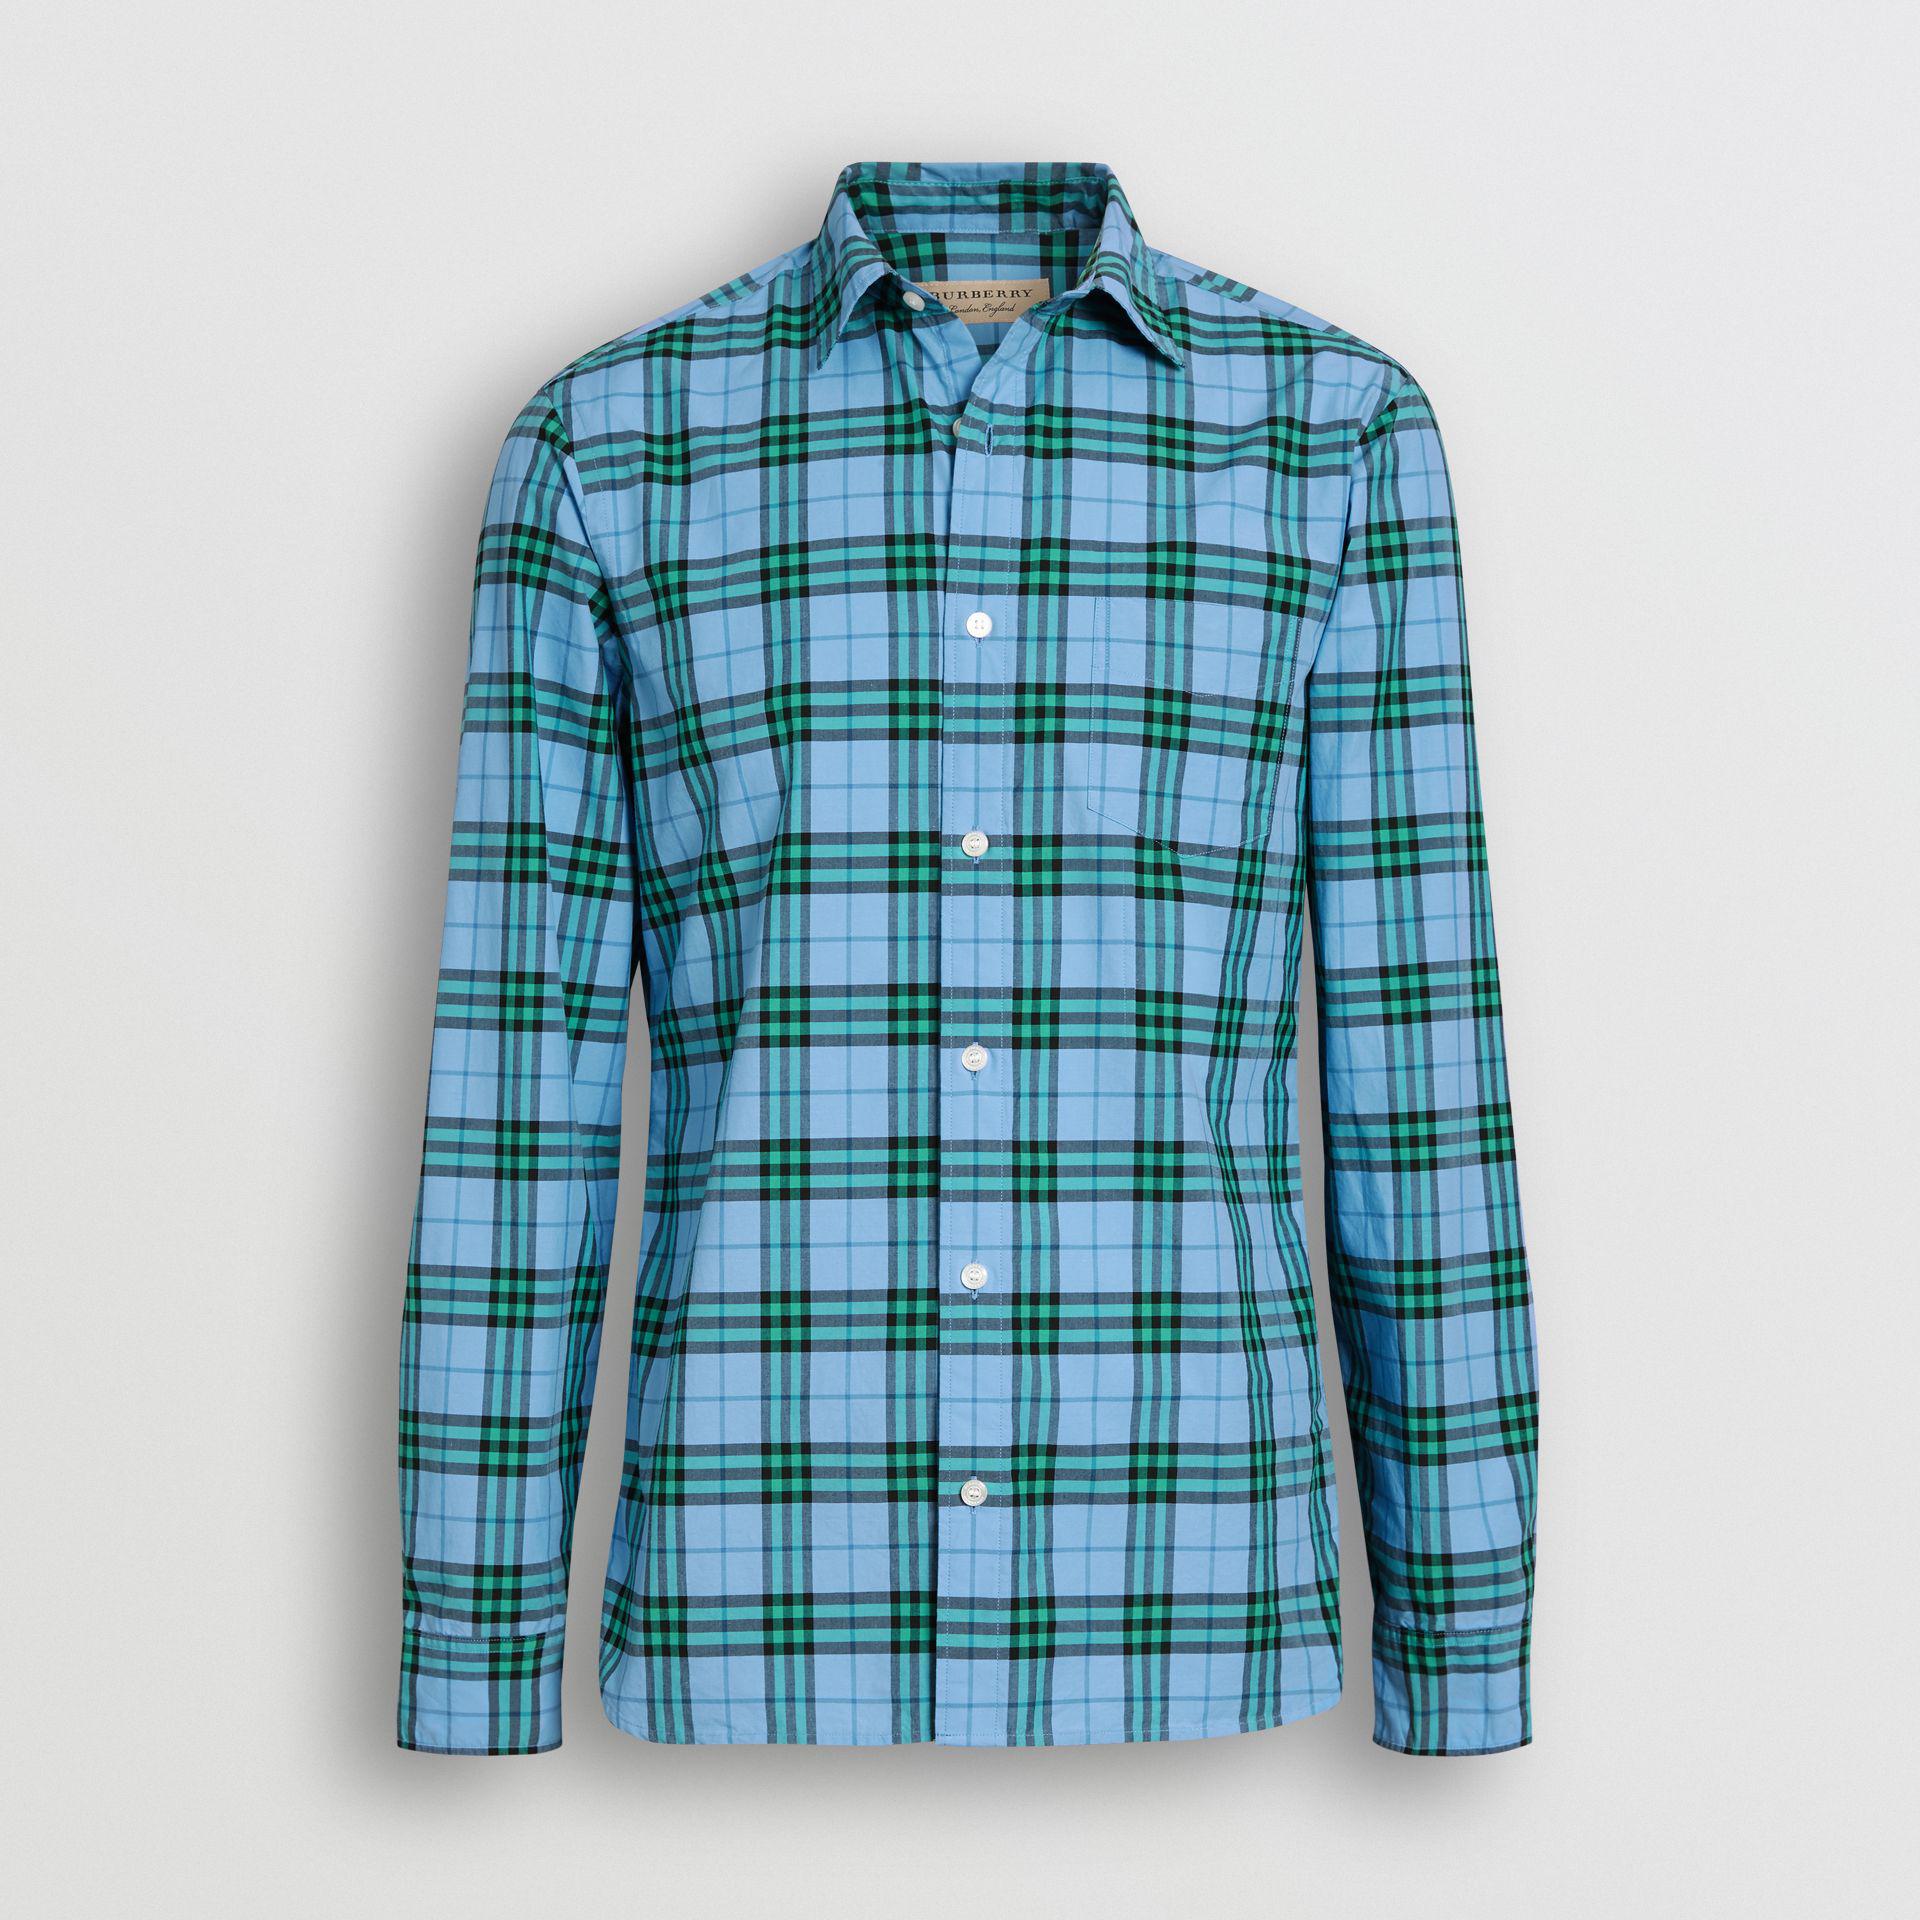 Burberry Check Cotton Shirt in Blue Topaz (Blue) for Men - Lyst